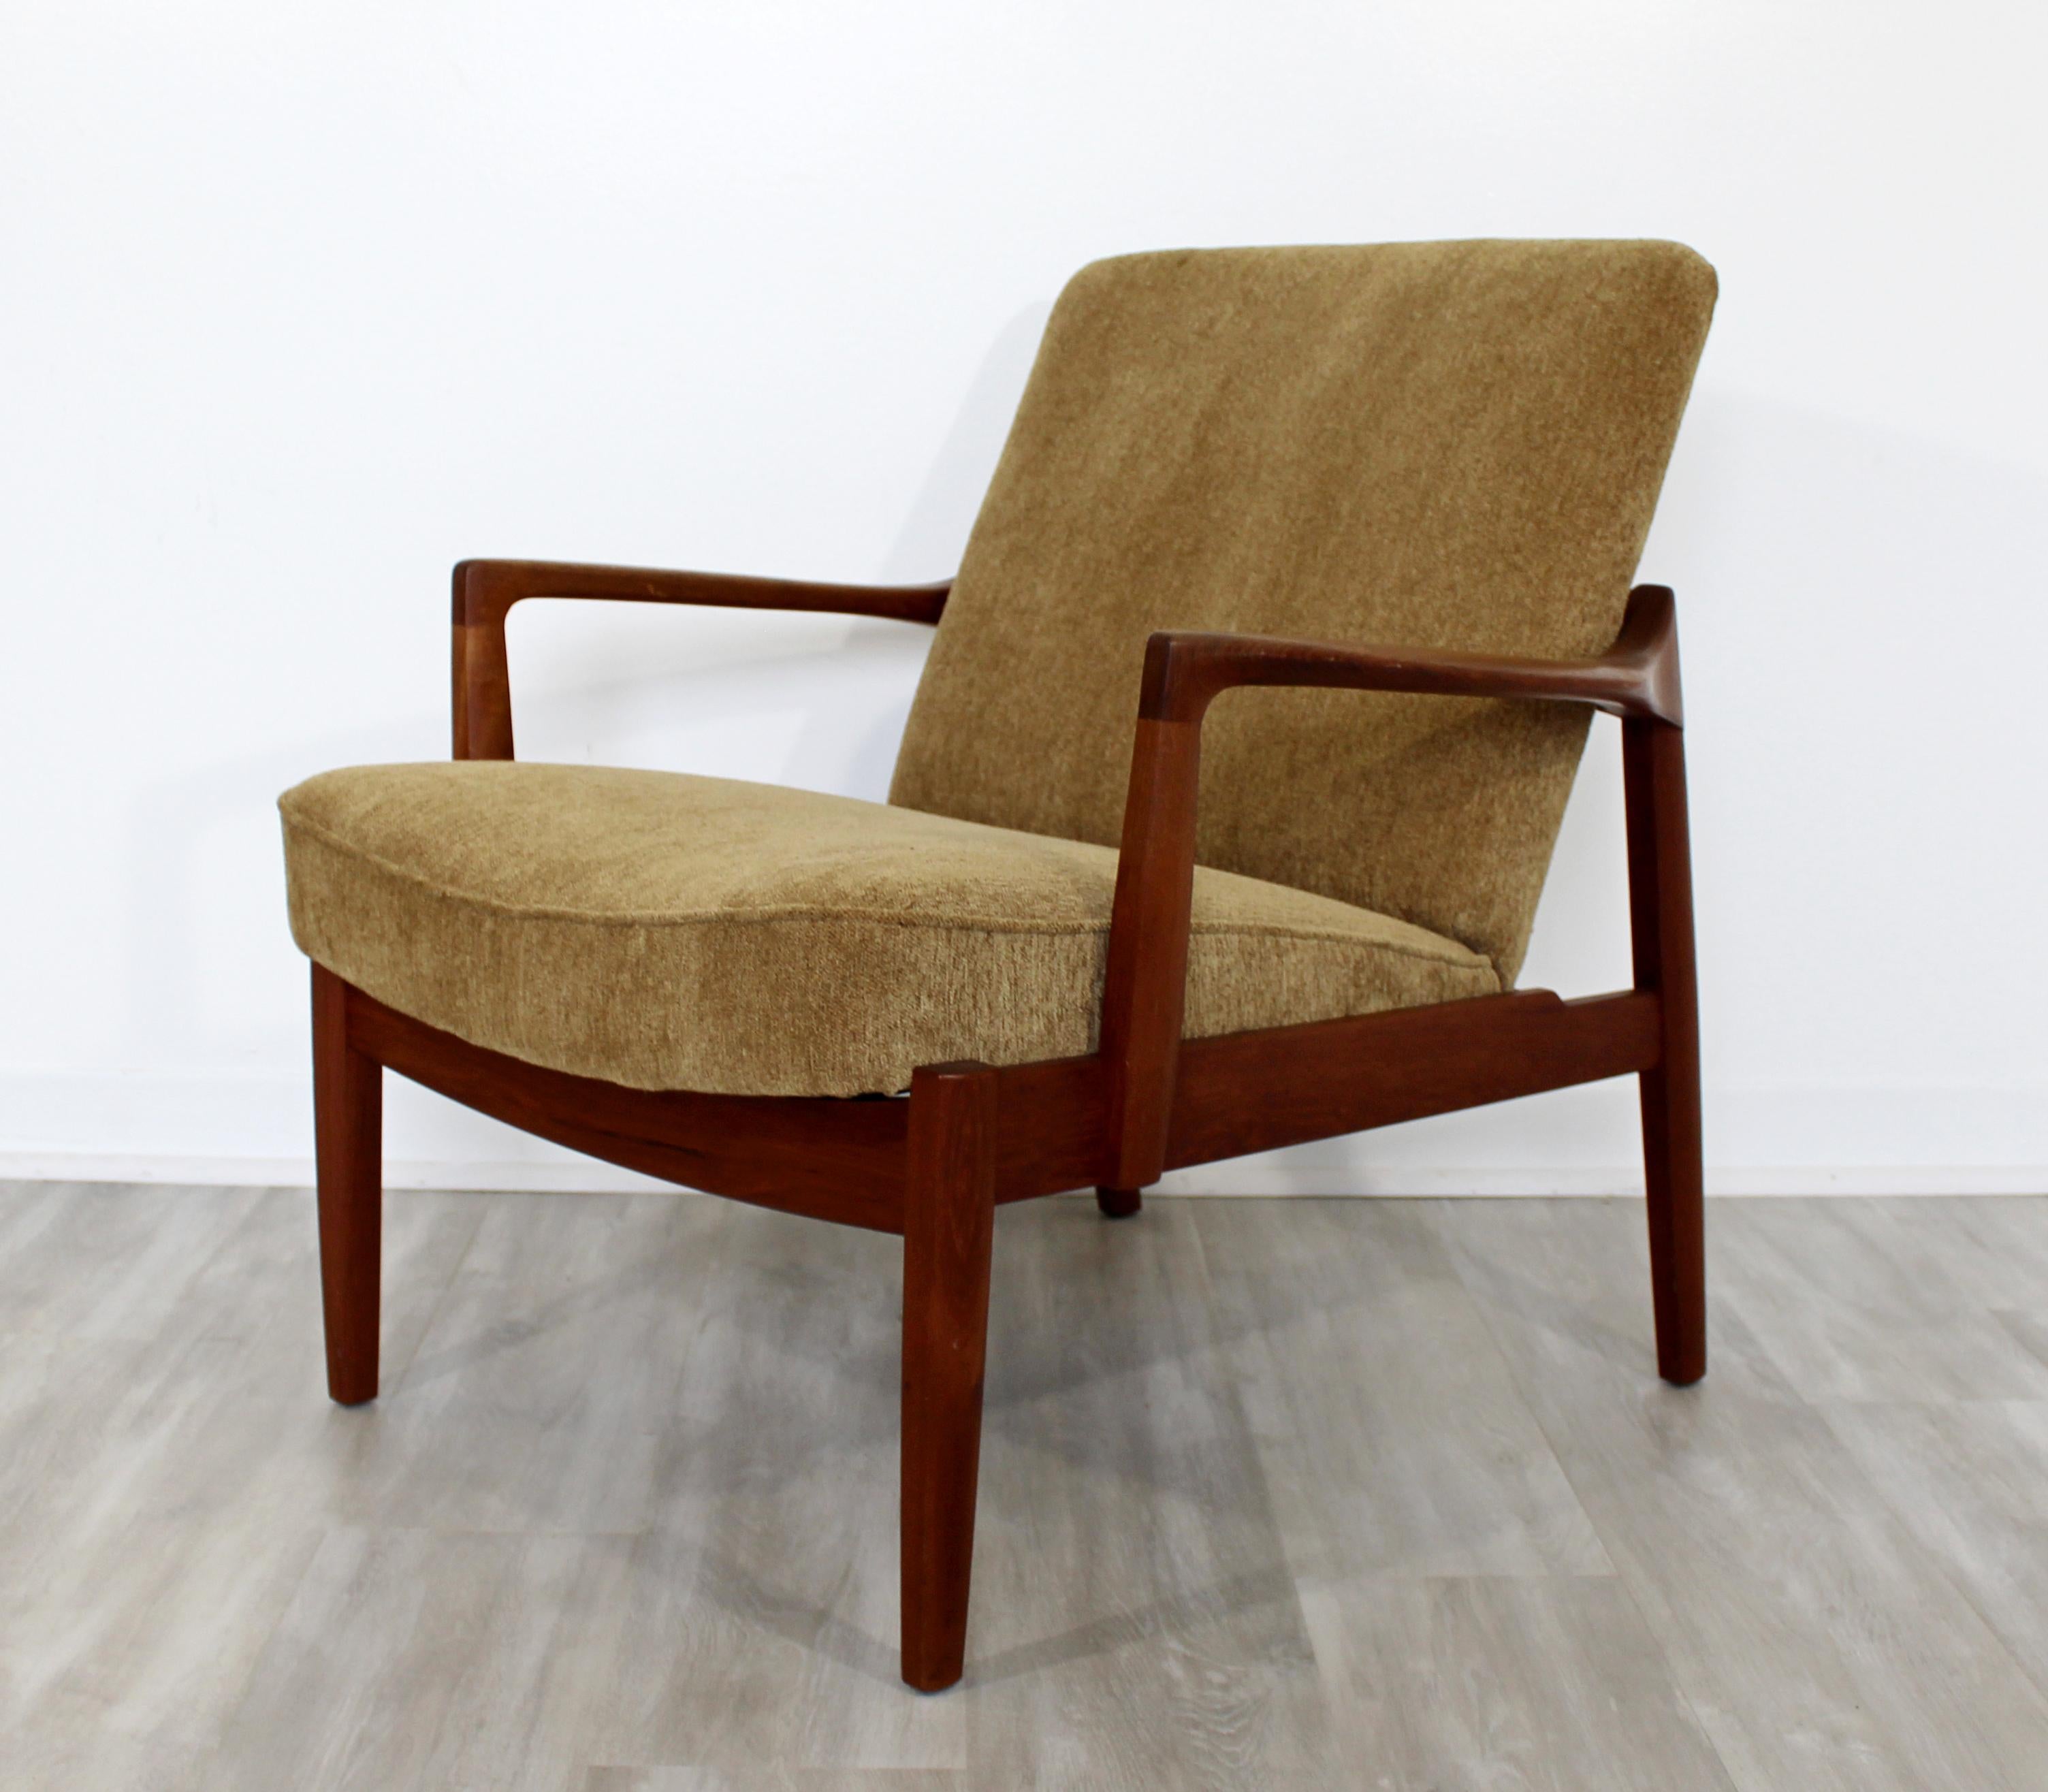 For your consideration is an incredible, Danish teak armchair, 135 Teak Lounge Chair by Tove & Edvard Kindt-Larsen for France & Søn, circa the 1950s. In excellent condition. The cushions have recently been professionally reupholstered. The